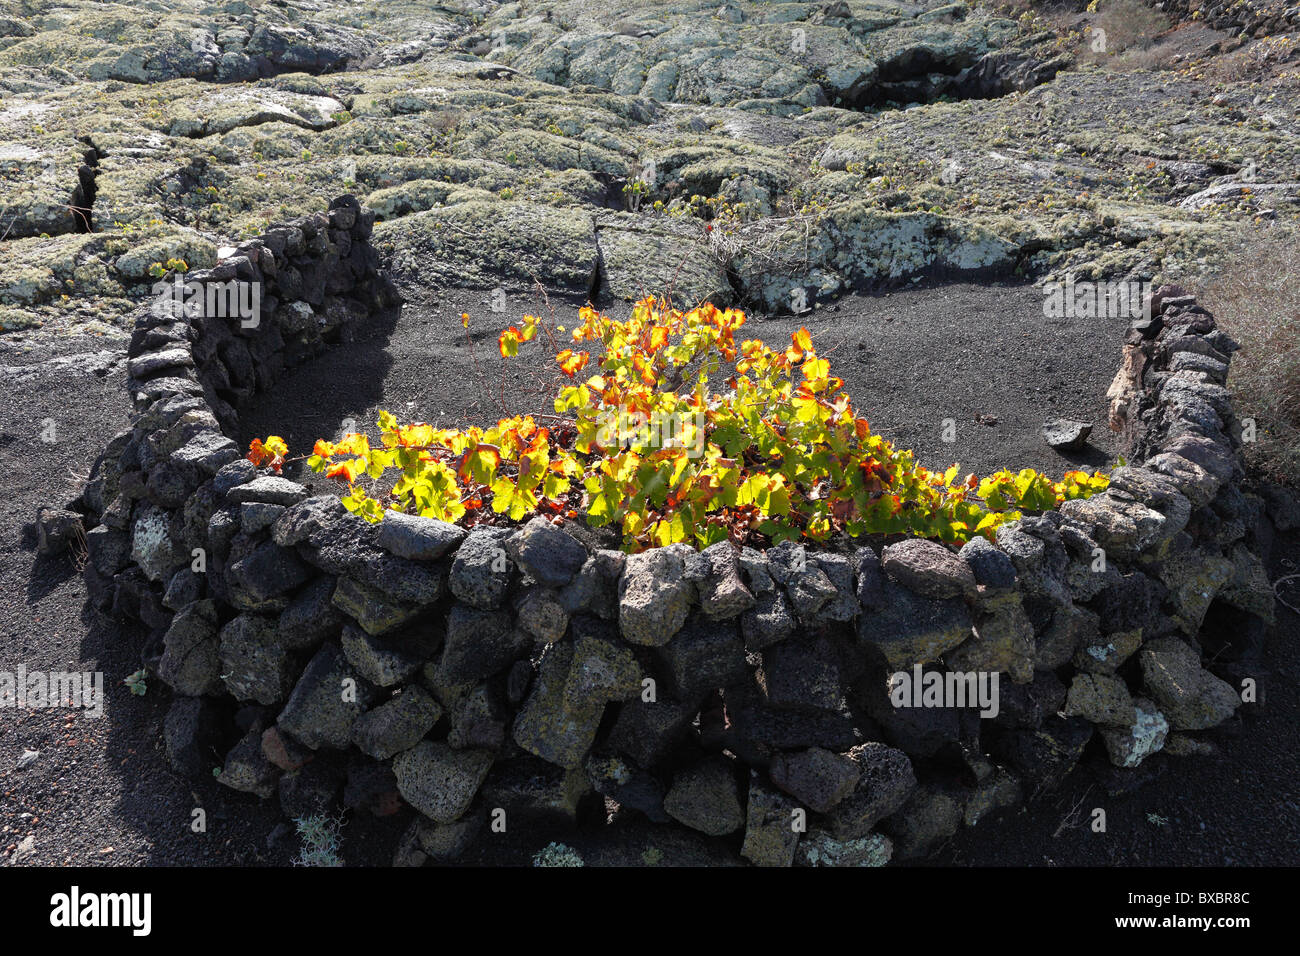 Grapevine surrounded by a moon-shaped stone wall, La Geria, Lanzarote, Canary Islands, Spain, Europe Stock Photo